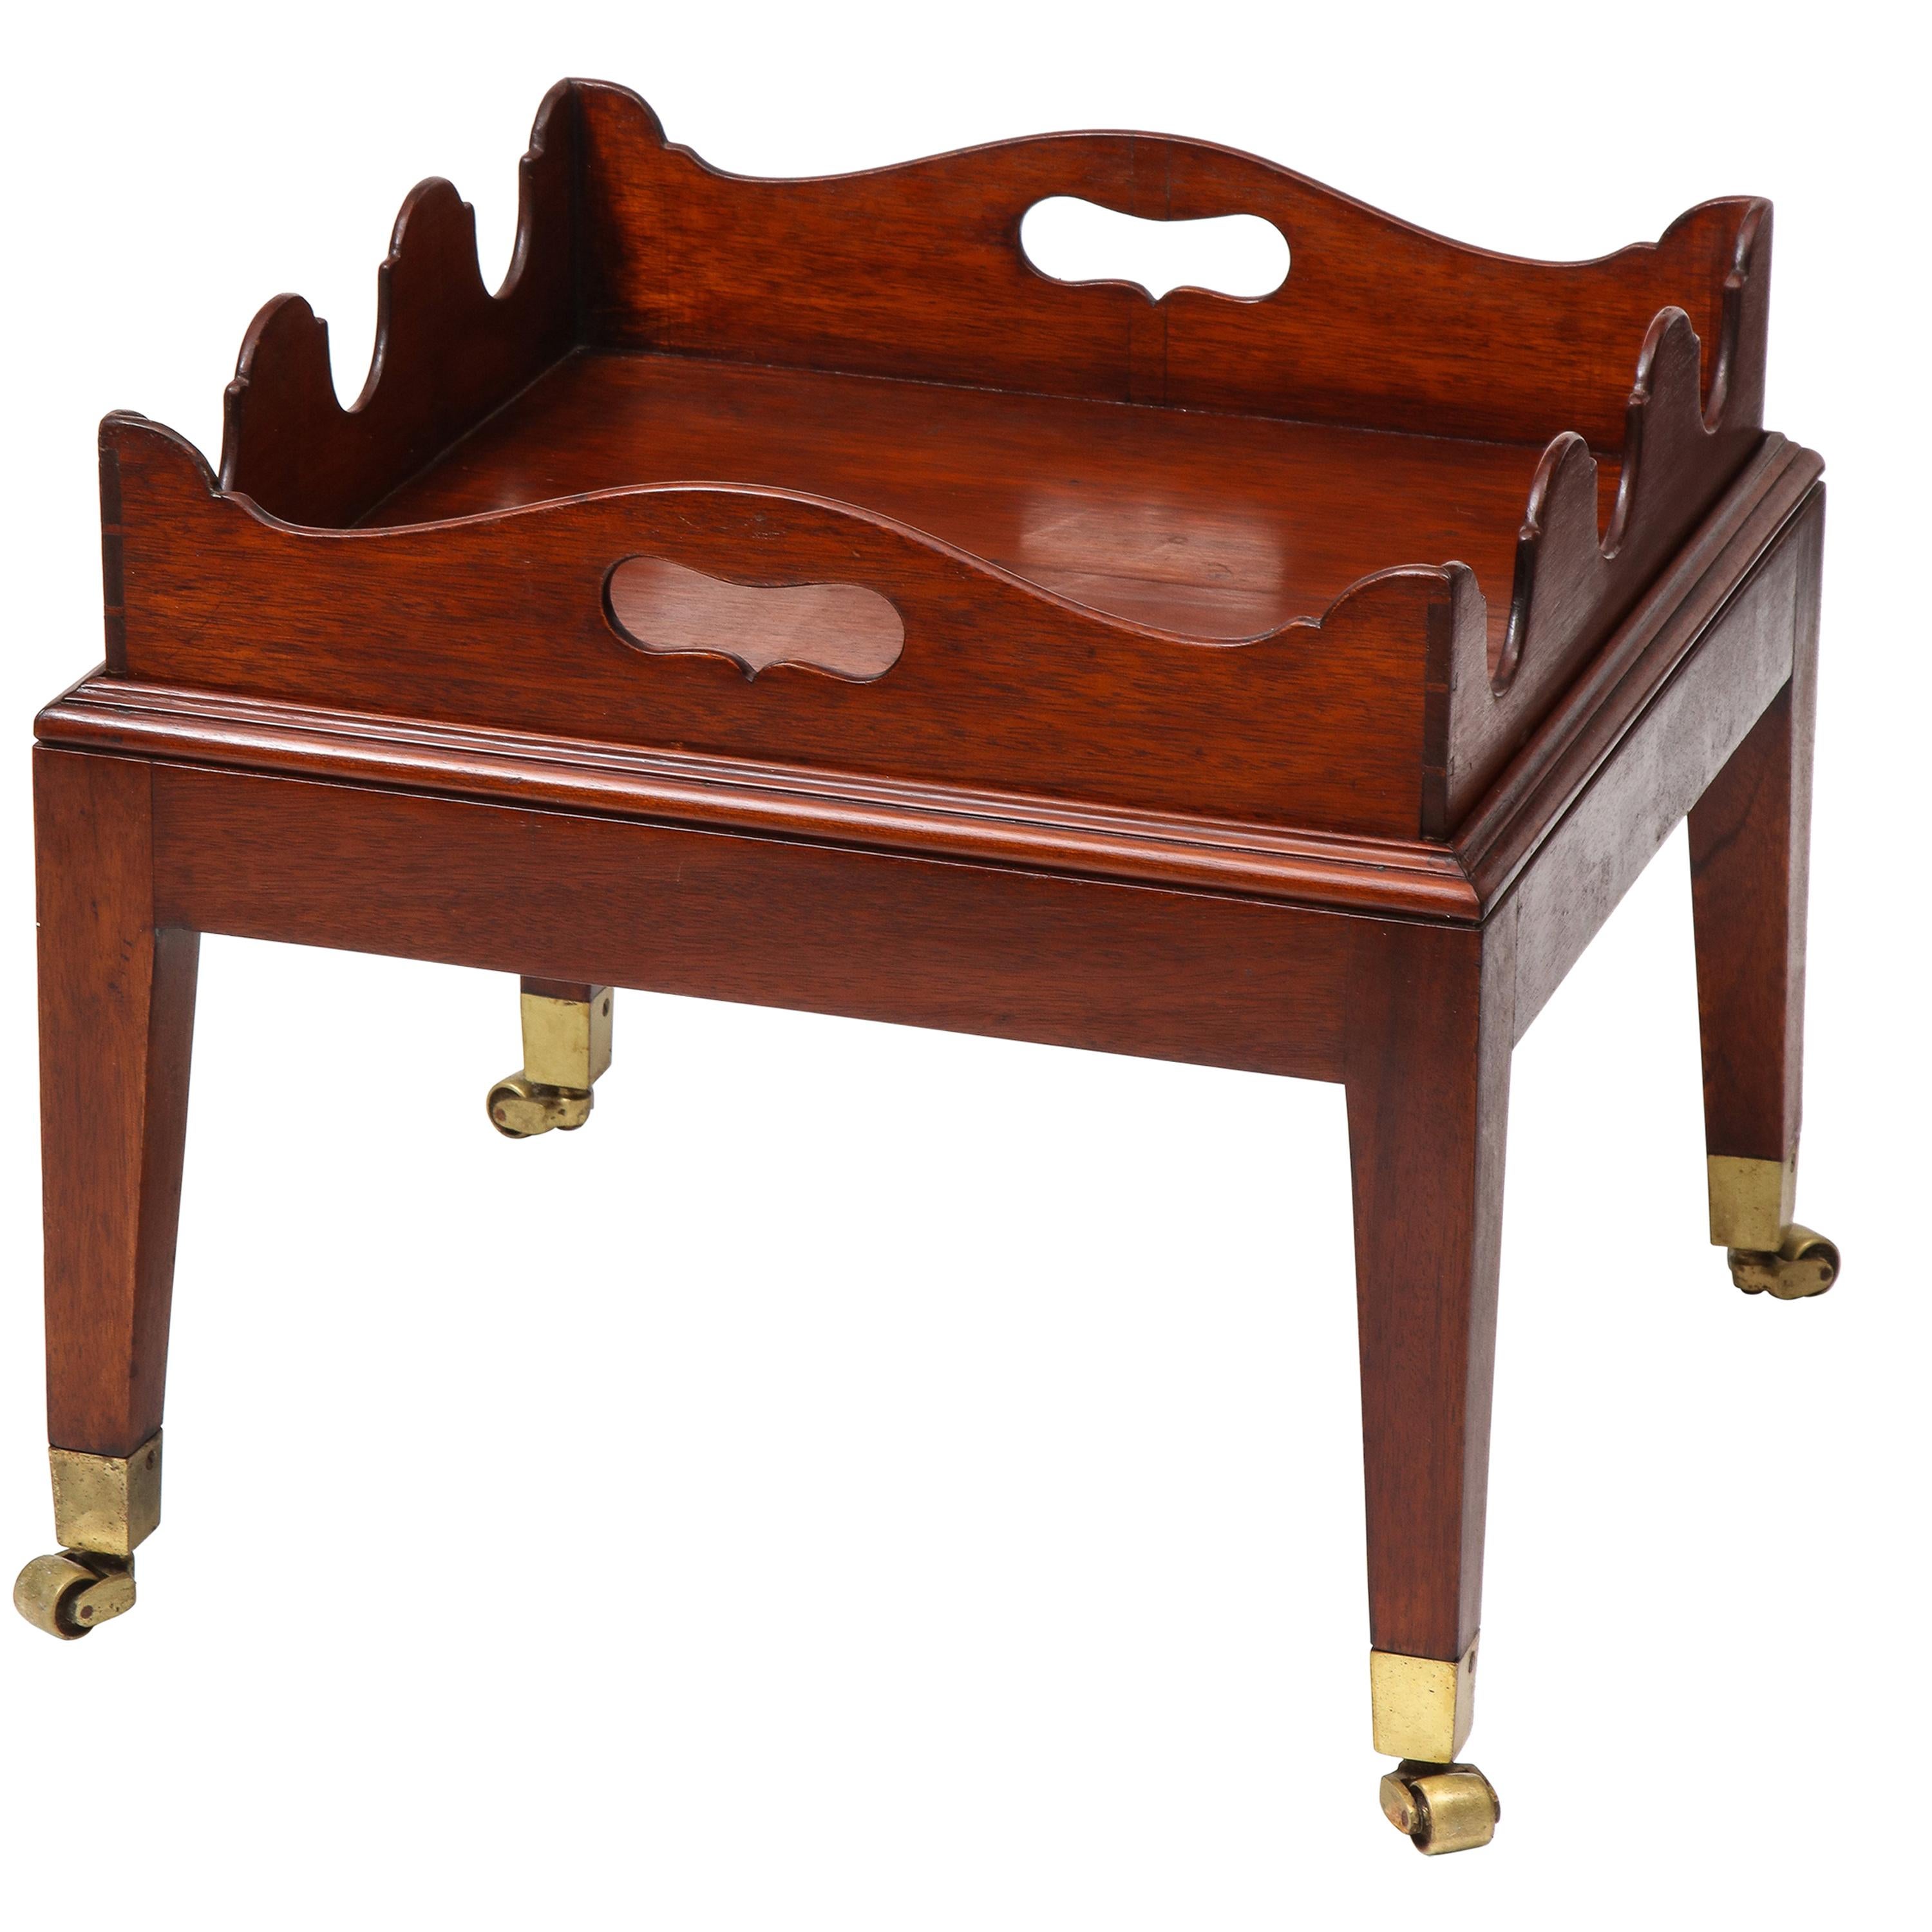 Small-Scale Georgian Style Mahogany Low Table